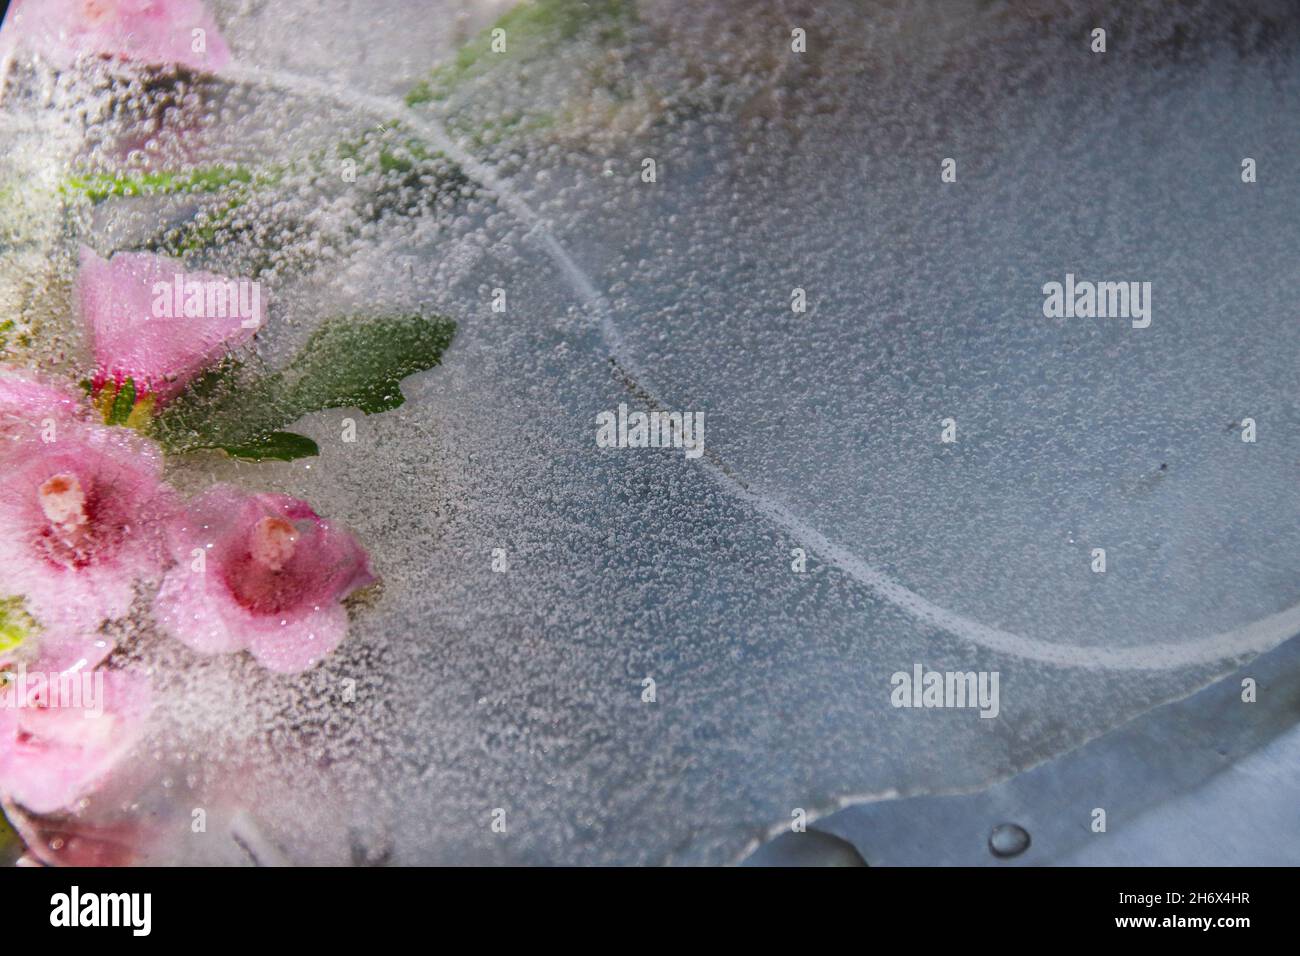 Pink flowers icebound in the thawing ice showing the concept of Winter giving way to Spring or Seasonal Switch Stock Photo